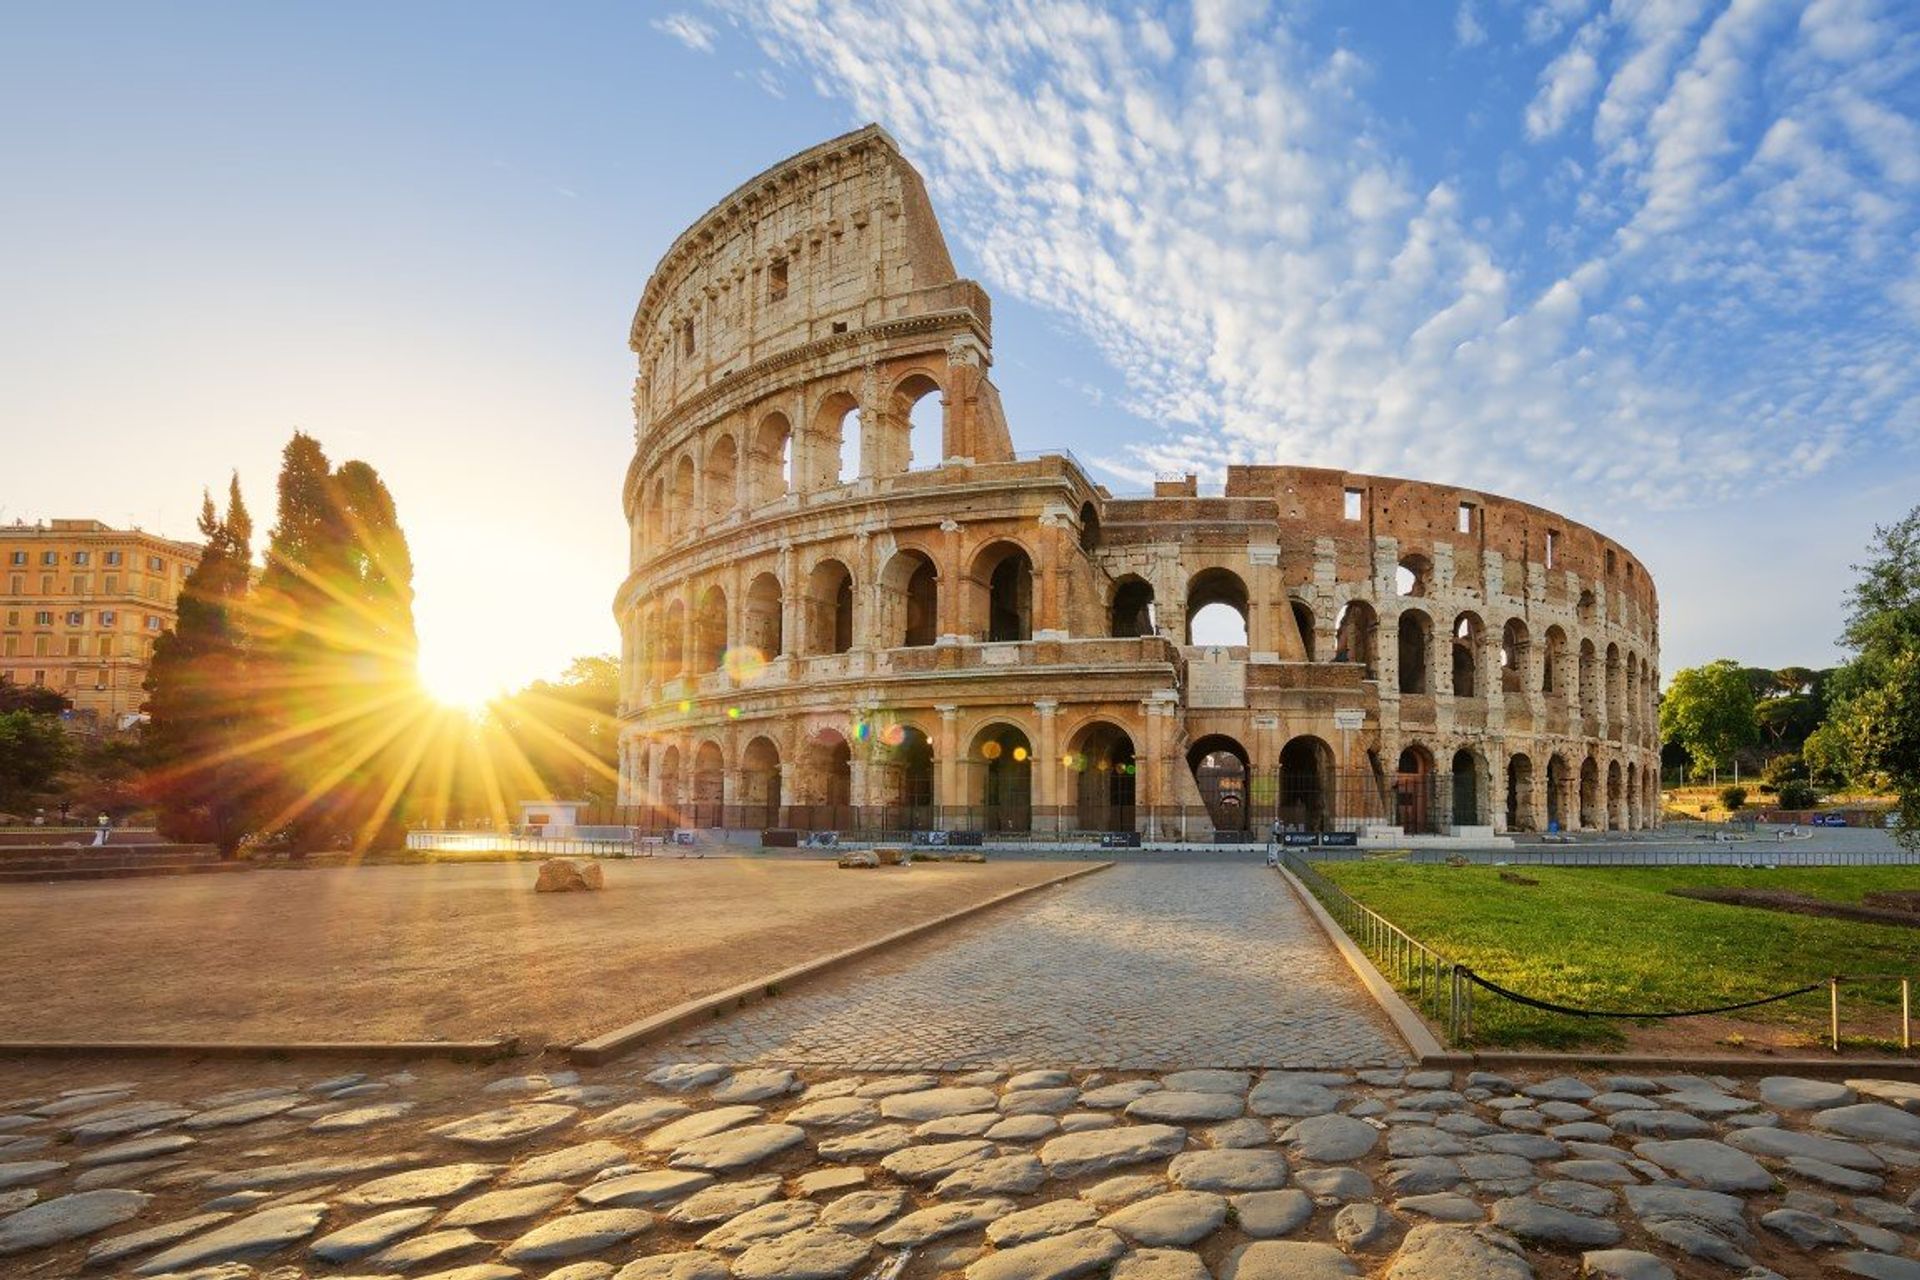 An iconic monument in the centre of the city, The Rome Colosseum is the largest amphitheatre ever built